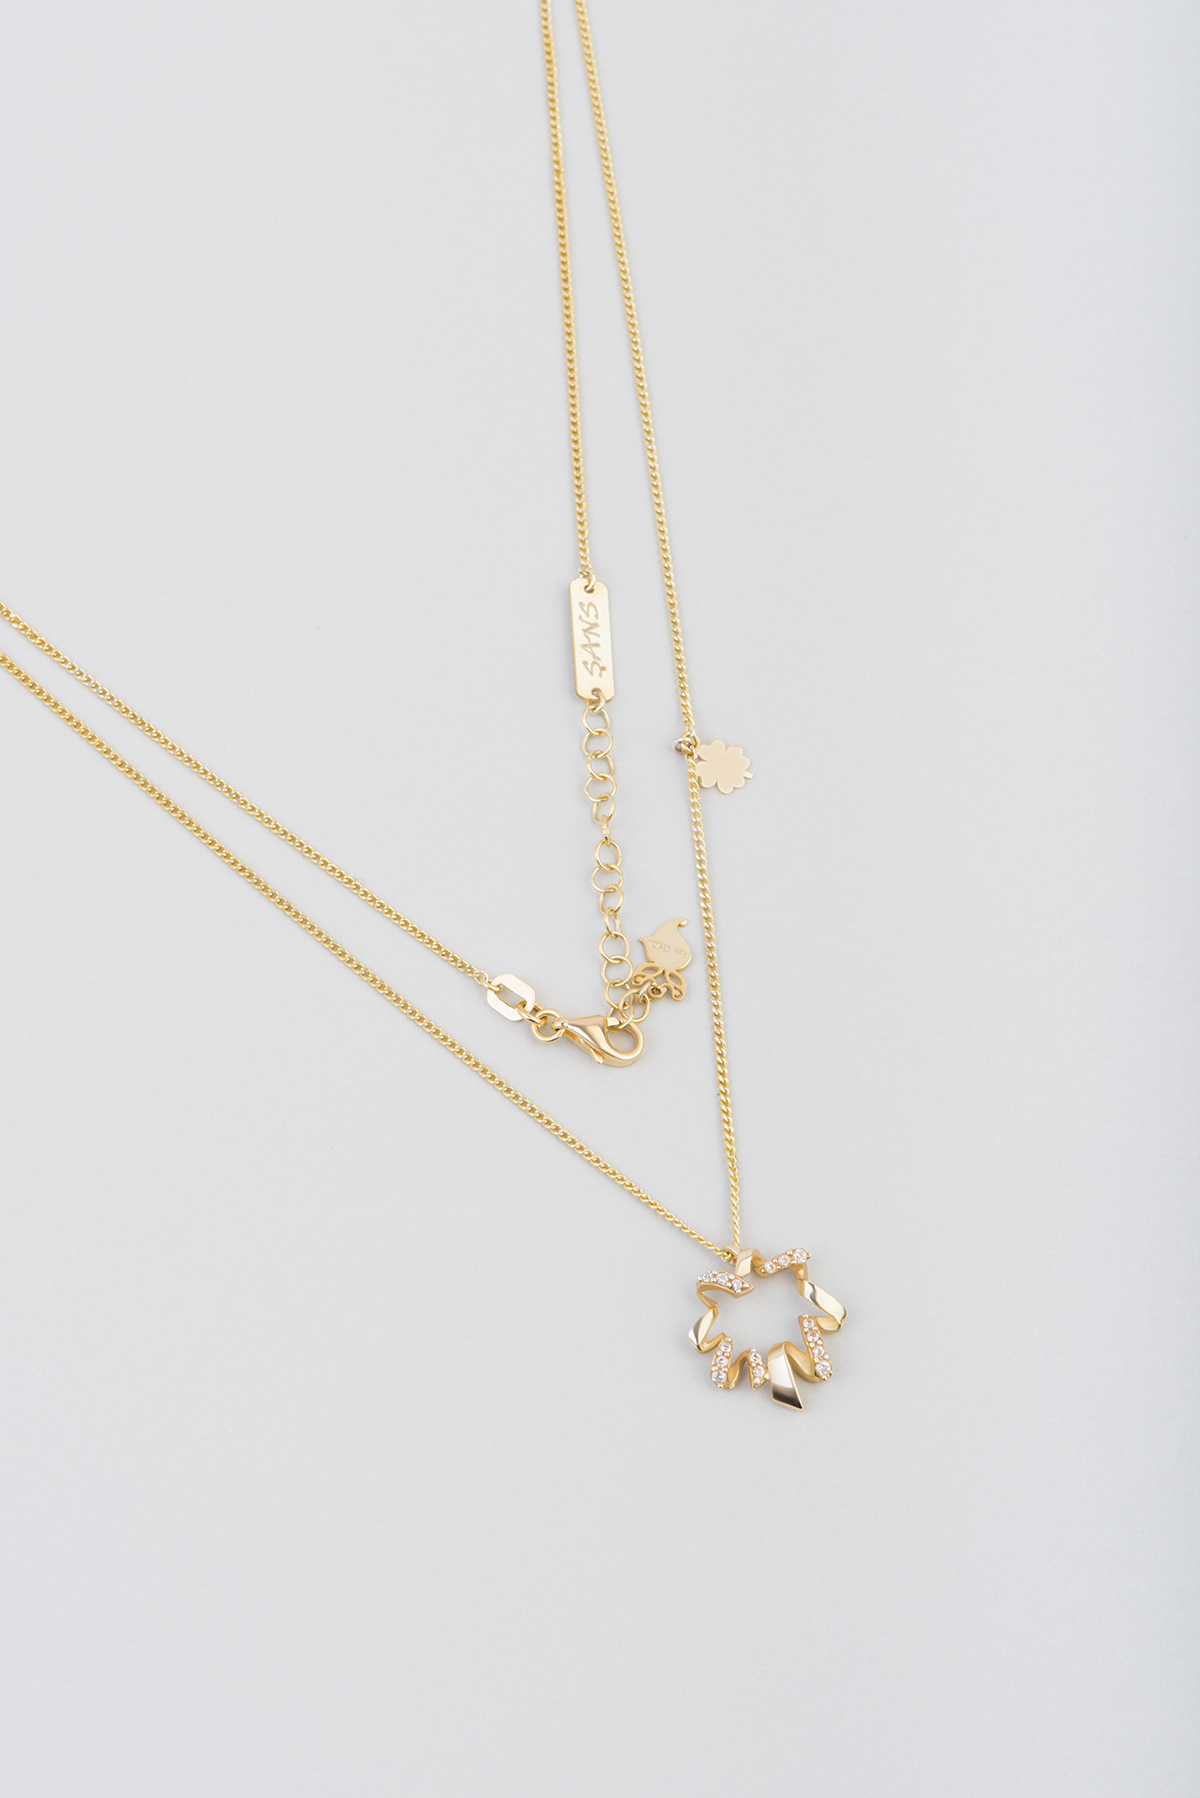  Luck Steps 18 Karat Yellow Gold Plated Silver Necklace